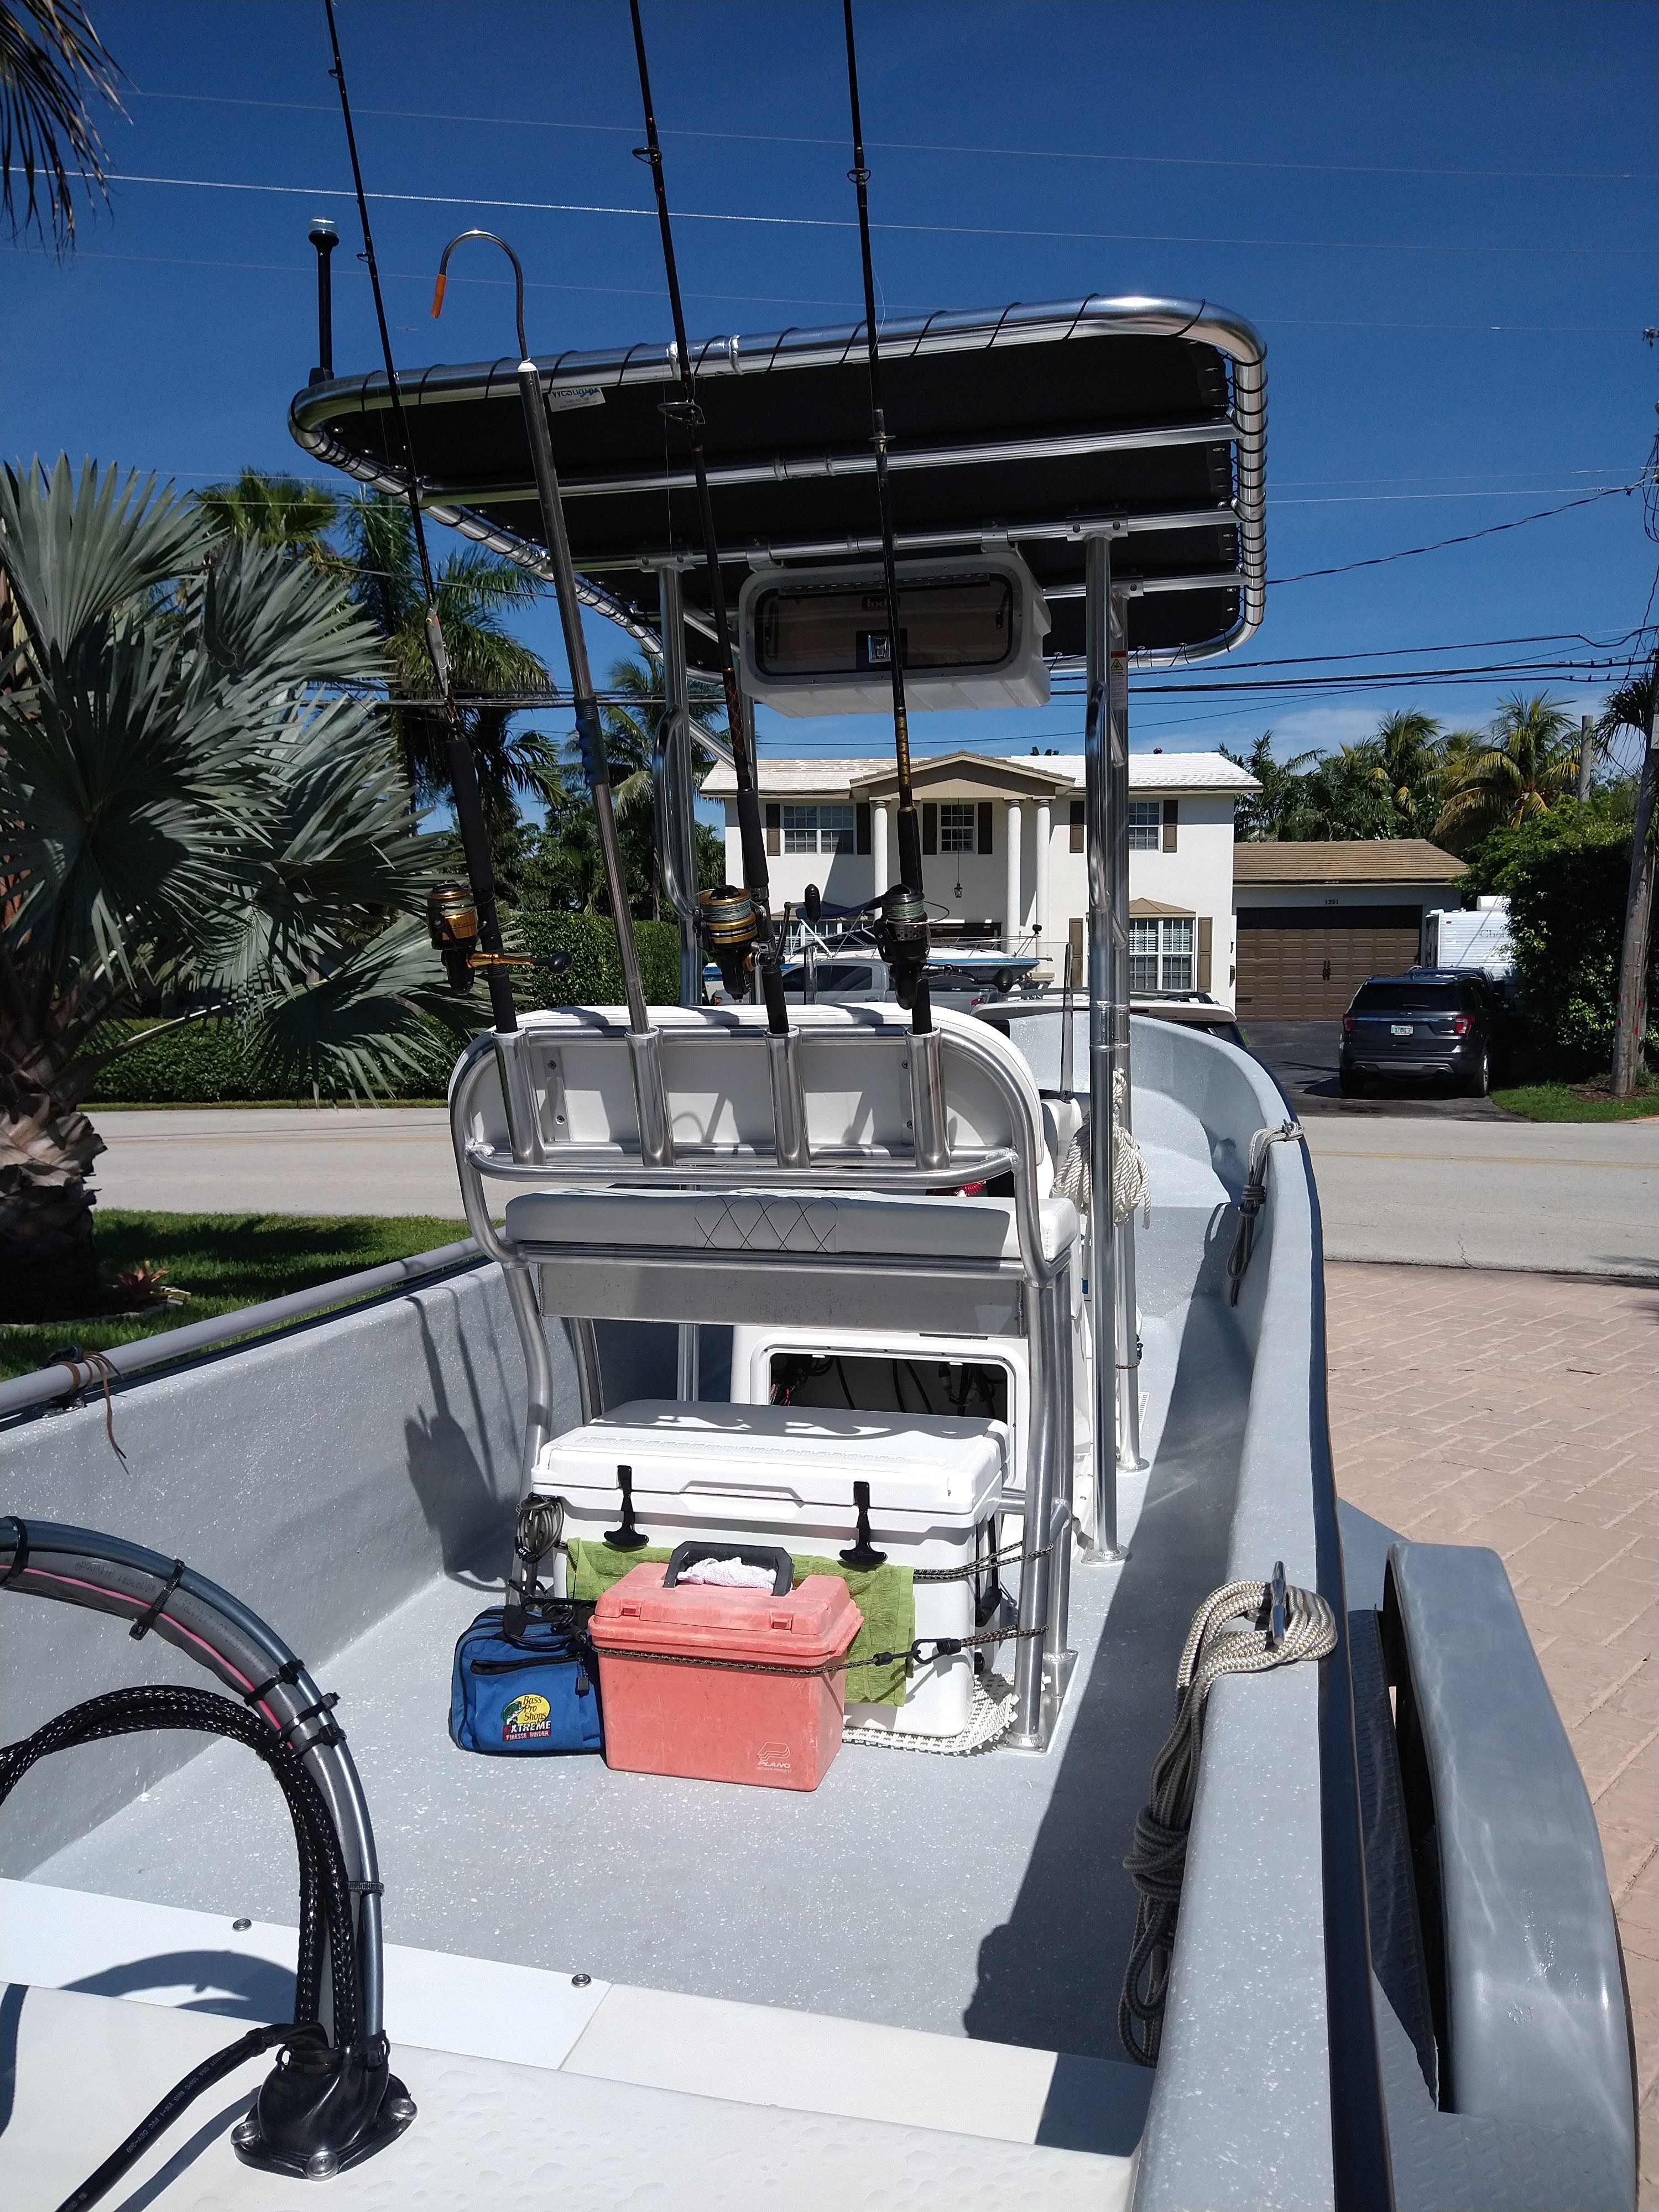 2021 23 foot none Panga Power boat for sale in Pompano Beach, FL - image 2 